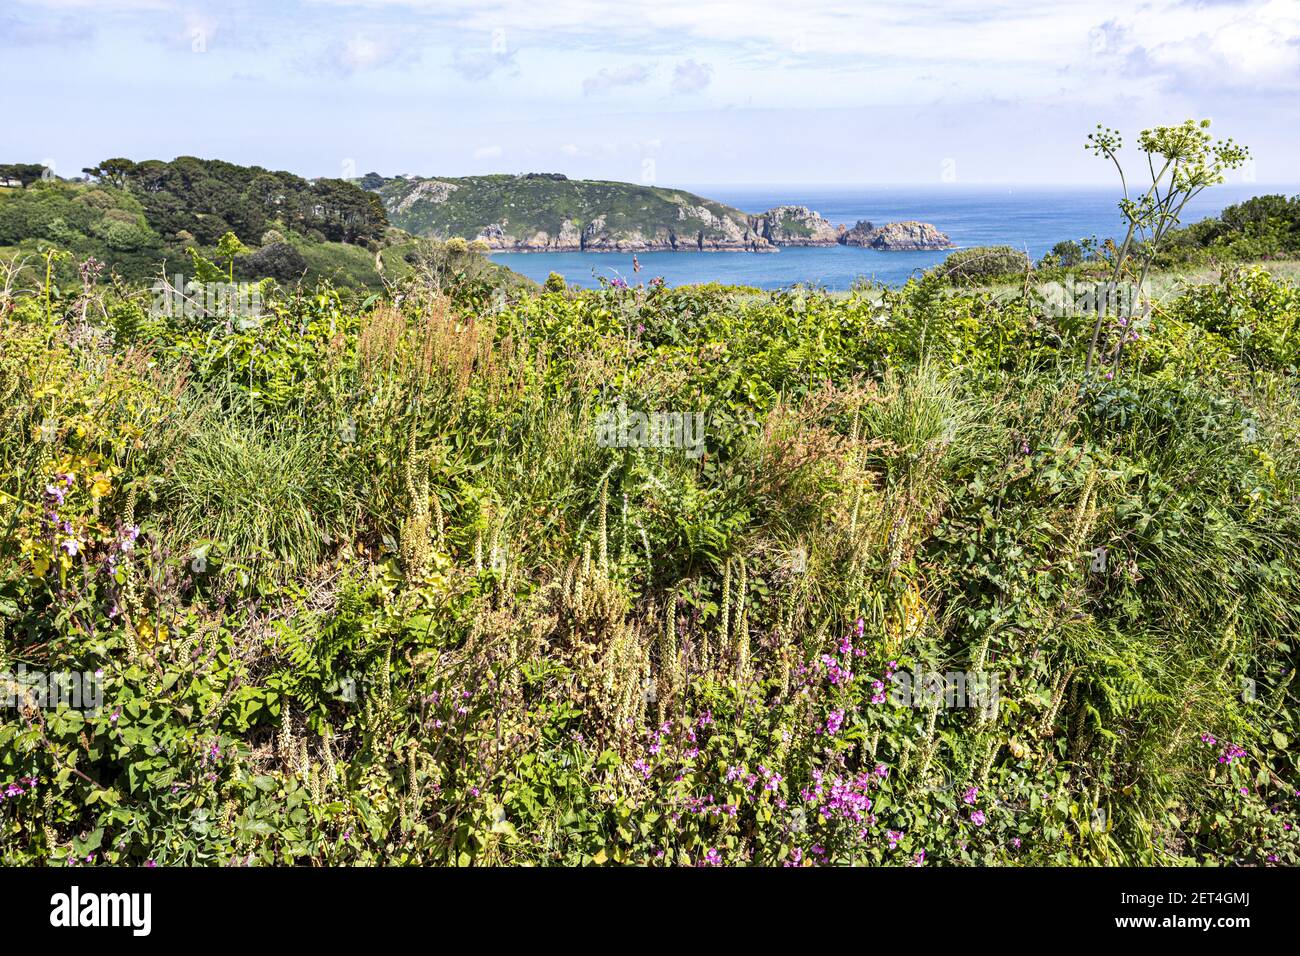 The beautiful rugged south coast of Guernsey - A glimpse of Saints Bay from the Icart Road, Guernsey, Channel Islands UK Stock Photo